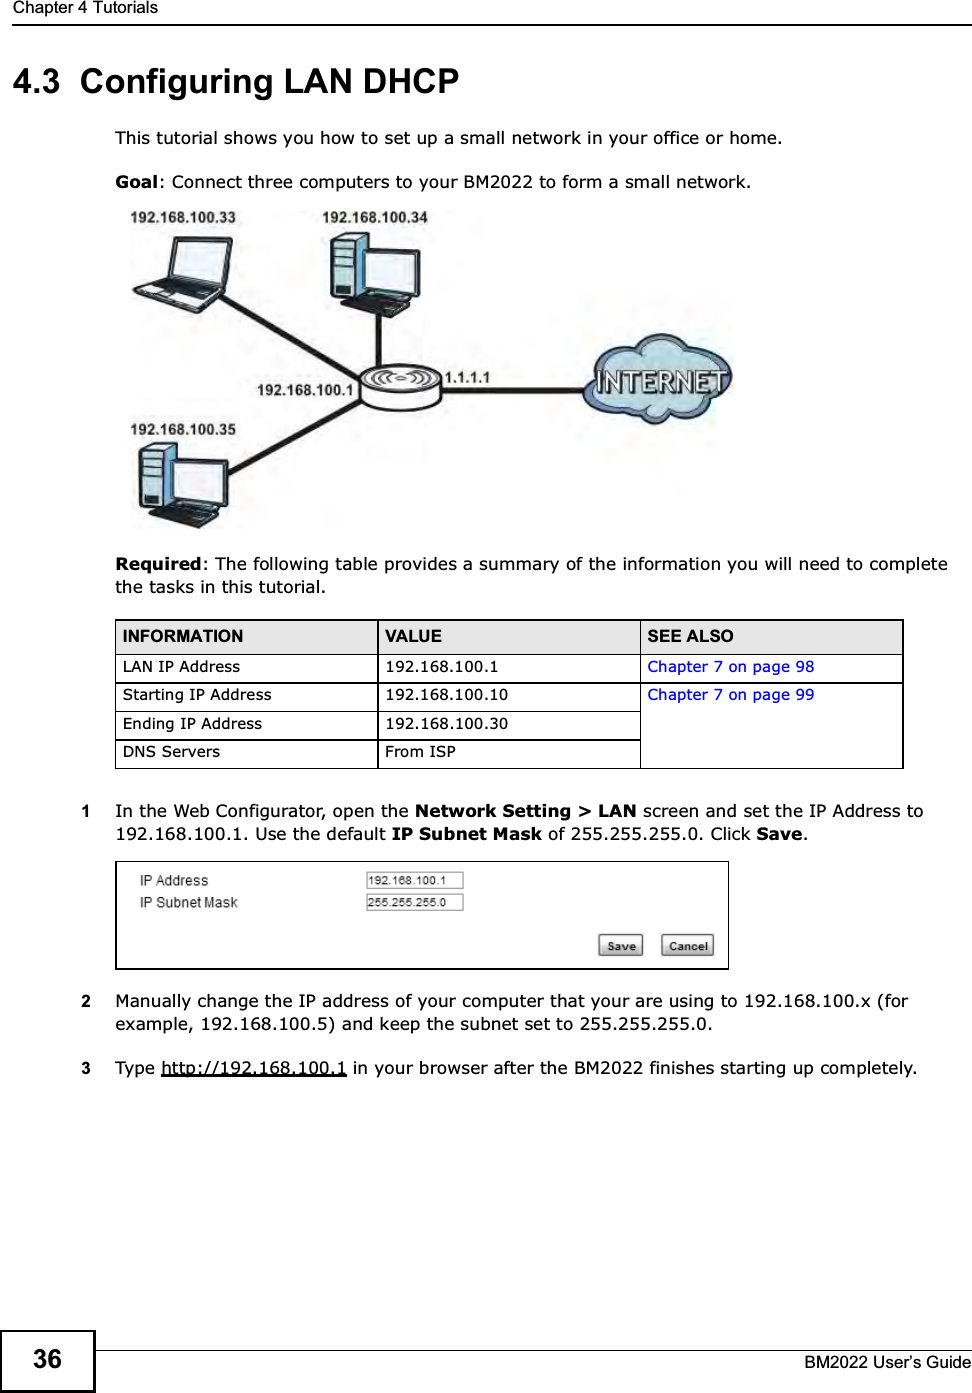 Chapter 4 TutorialsBM2022 Users Guide364.3  Configuring LAN DHCPThis tutorial shows you how to set up a small network in your office or home.Goal: Connect three computers to your BM2022 to form a small network. Required: The following table provides a summary of the information you will need to complete the tasks in this tutorial. 1In the Web Configurator, open the Network Setting &gt; LAN screen and set the IP Address to 192.168.100.1. Use the default IP Subnet Mask of 255.255.255.0. Click Save.2Manually change the IP address of your computer that your are using to 192.168.100.x (for example, 192.168.100.5) and keep the subnet set to 255.255.255.0.3Type http://192.168.100.1 in your browser after the BM2022 finishes starting up completely.INFORMATION VALUE SEE ALSOLAN IP Address 192.168.100.1 Chapter 7 on page 98Starting IP Address 192.168.100.10 Chapter 7 on page 99Ending IP Address 192.168.100.30DNS Servers From ISP